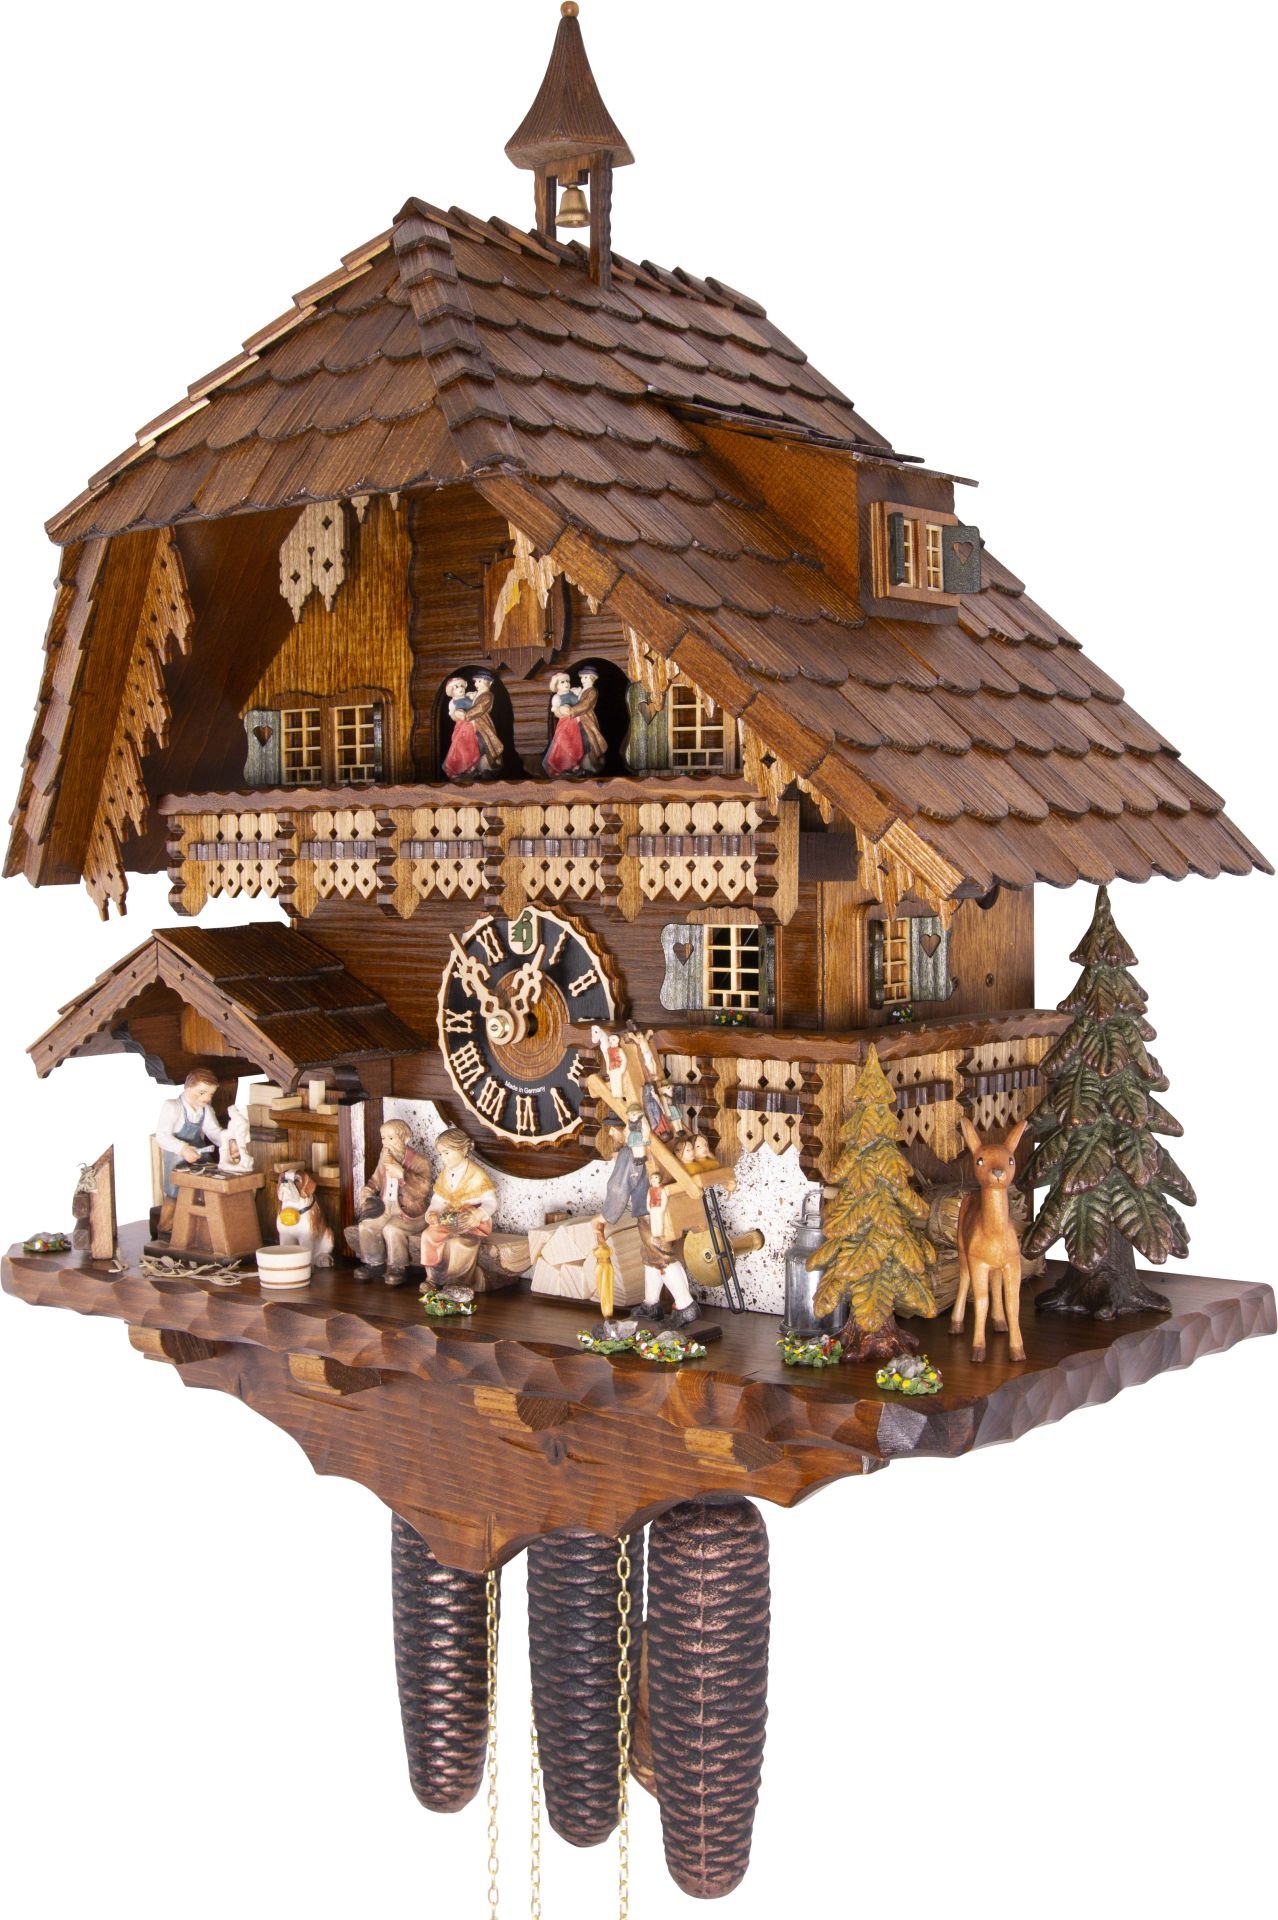 Cuckoo Clock Chalet Style 8 Day Movement 57cm by Hönes